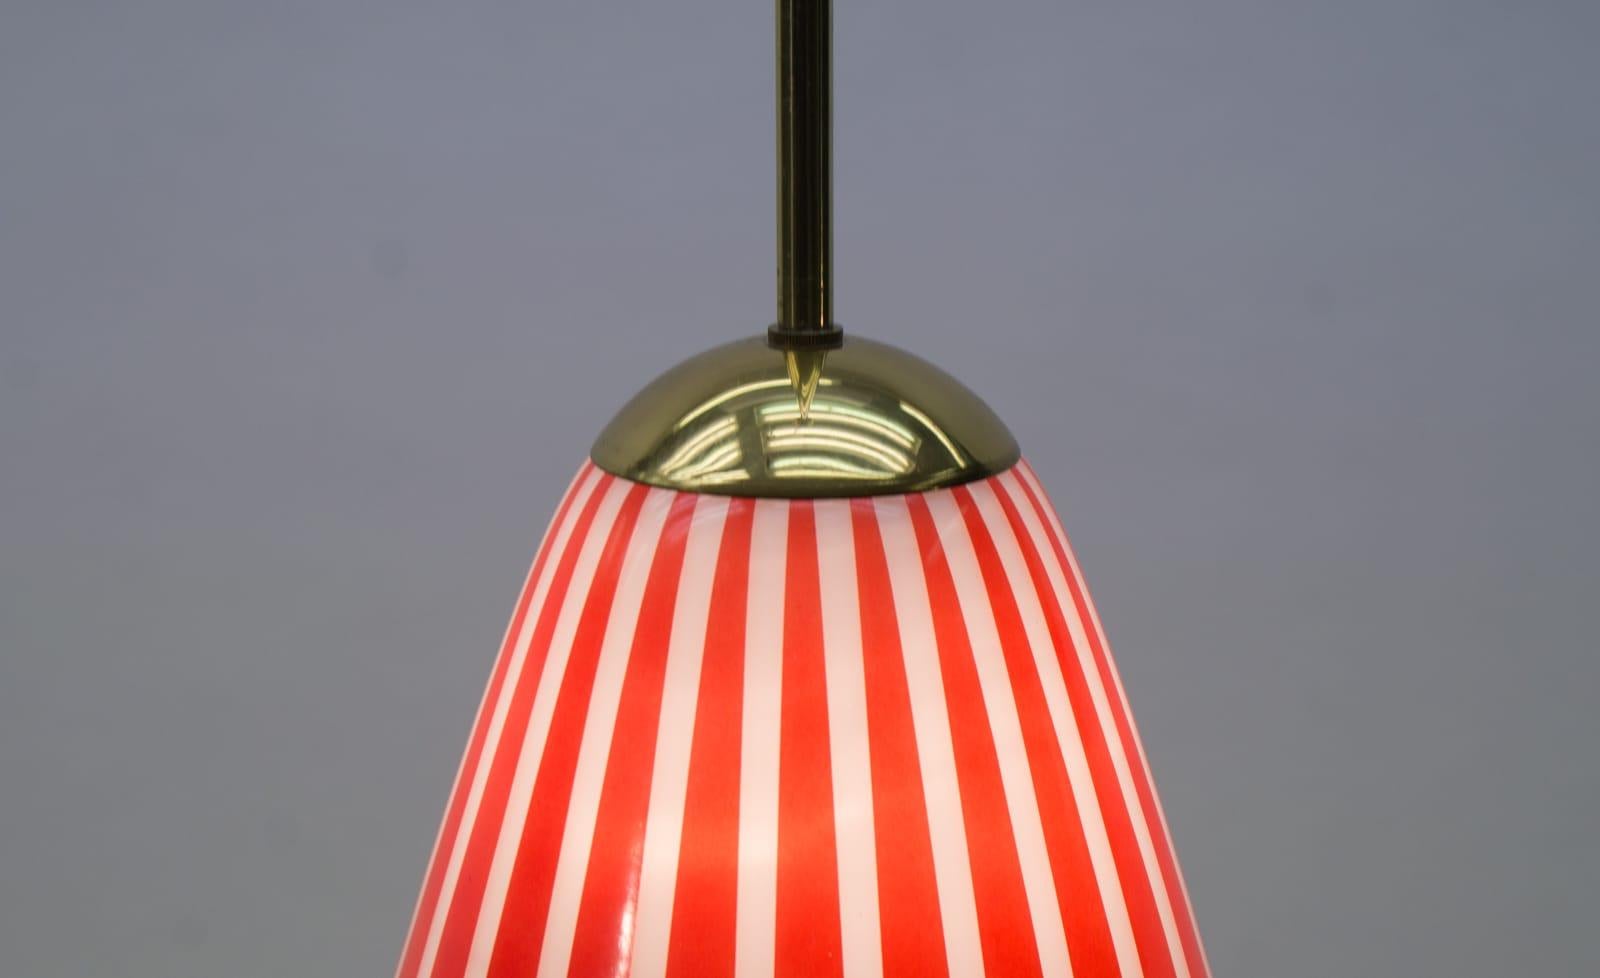 Elegant Mid-Century Modern Pendant Lamp Made of Brass and Glass, 1950s Austria For Sale 5